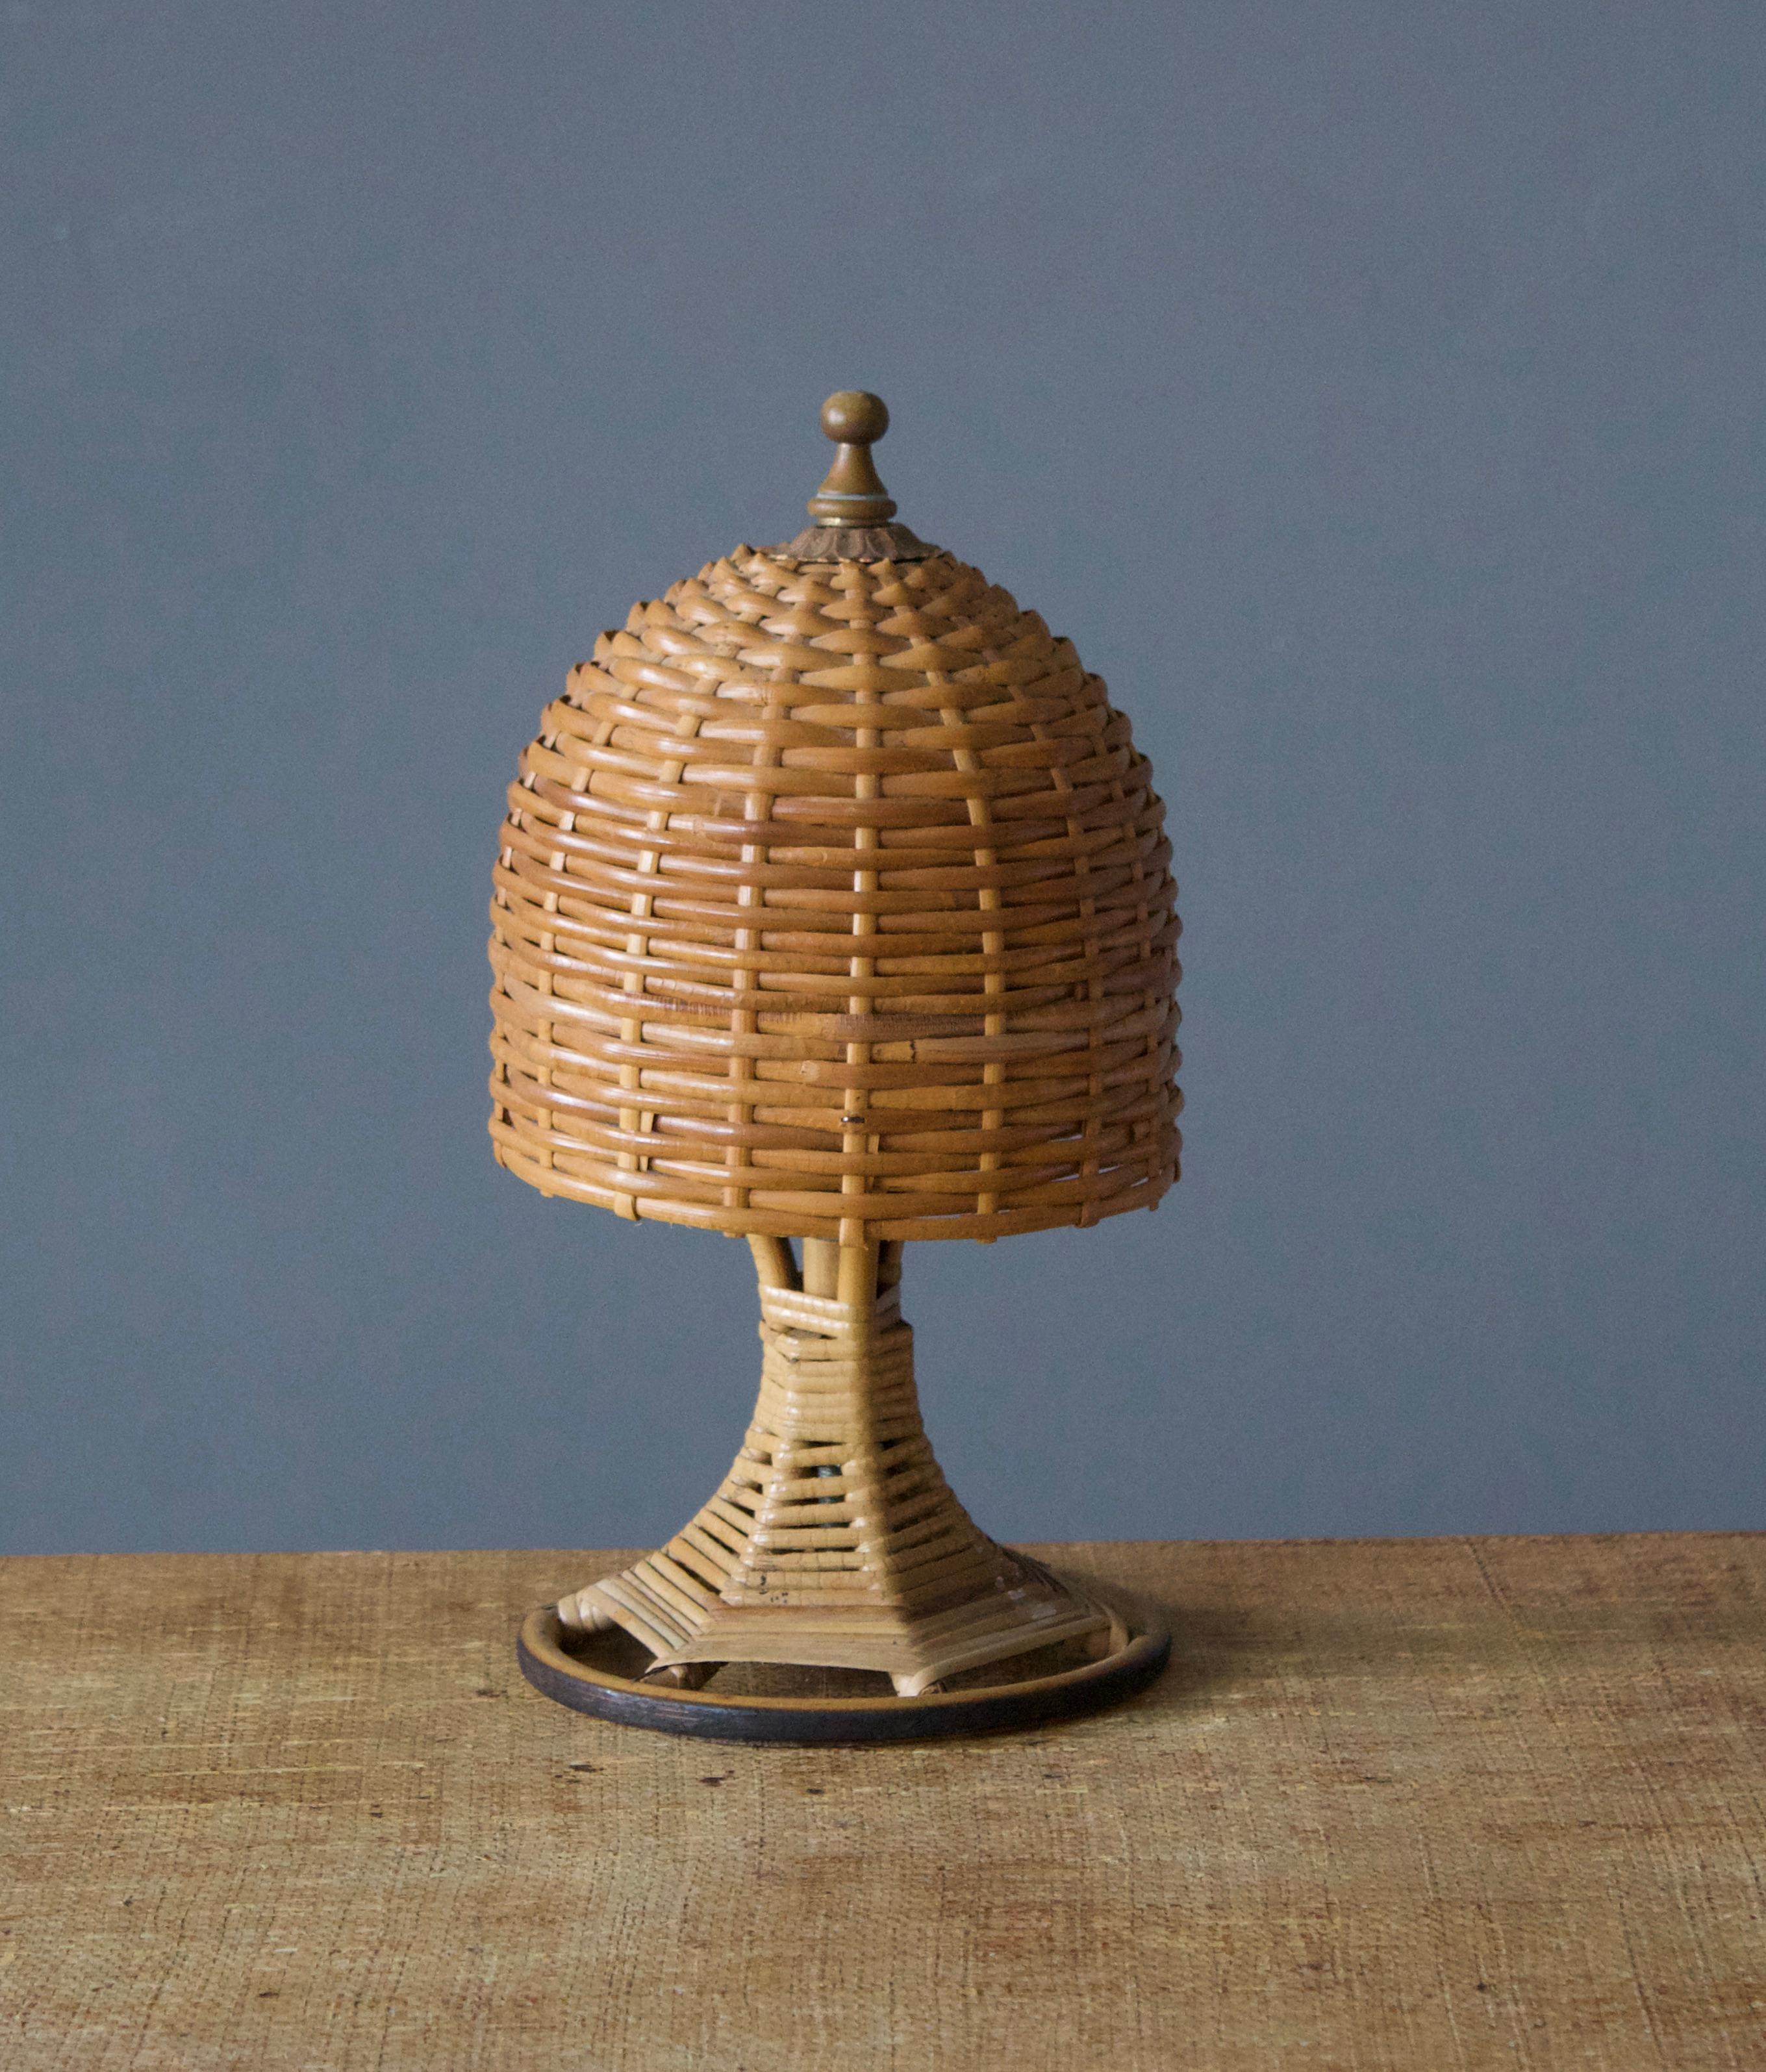 A table lamp, produced in Italy, 1960s-1970s. Rattan and brass.

Other designers of the period include Gio Ponti, Fontana Arte, Max Ingrand, Franco Albini, and Josef Frank.